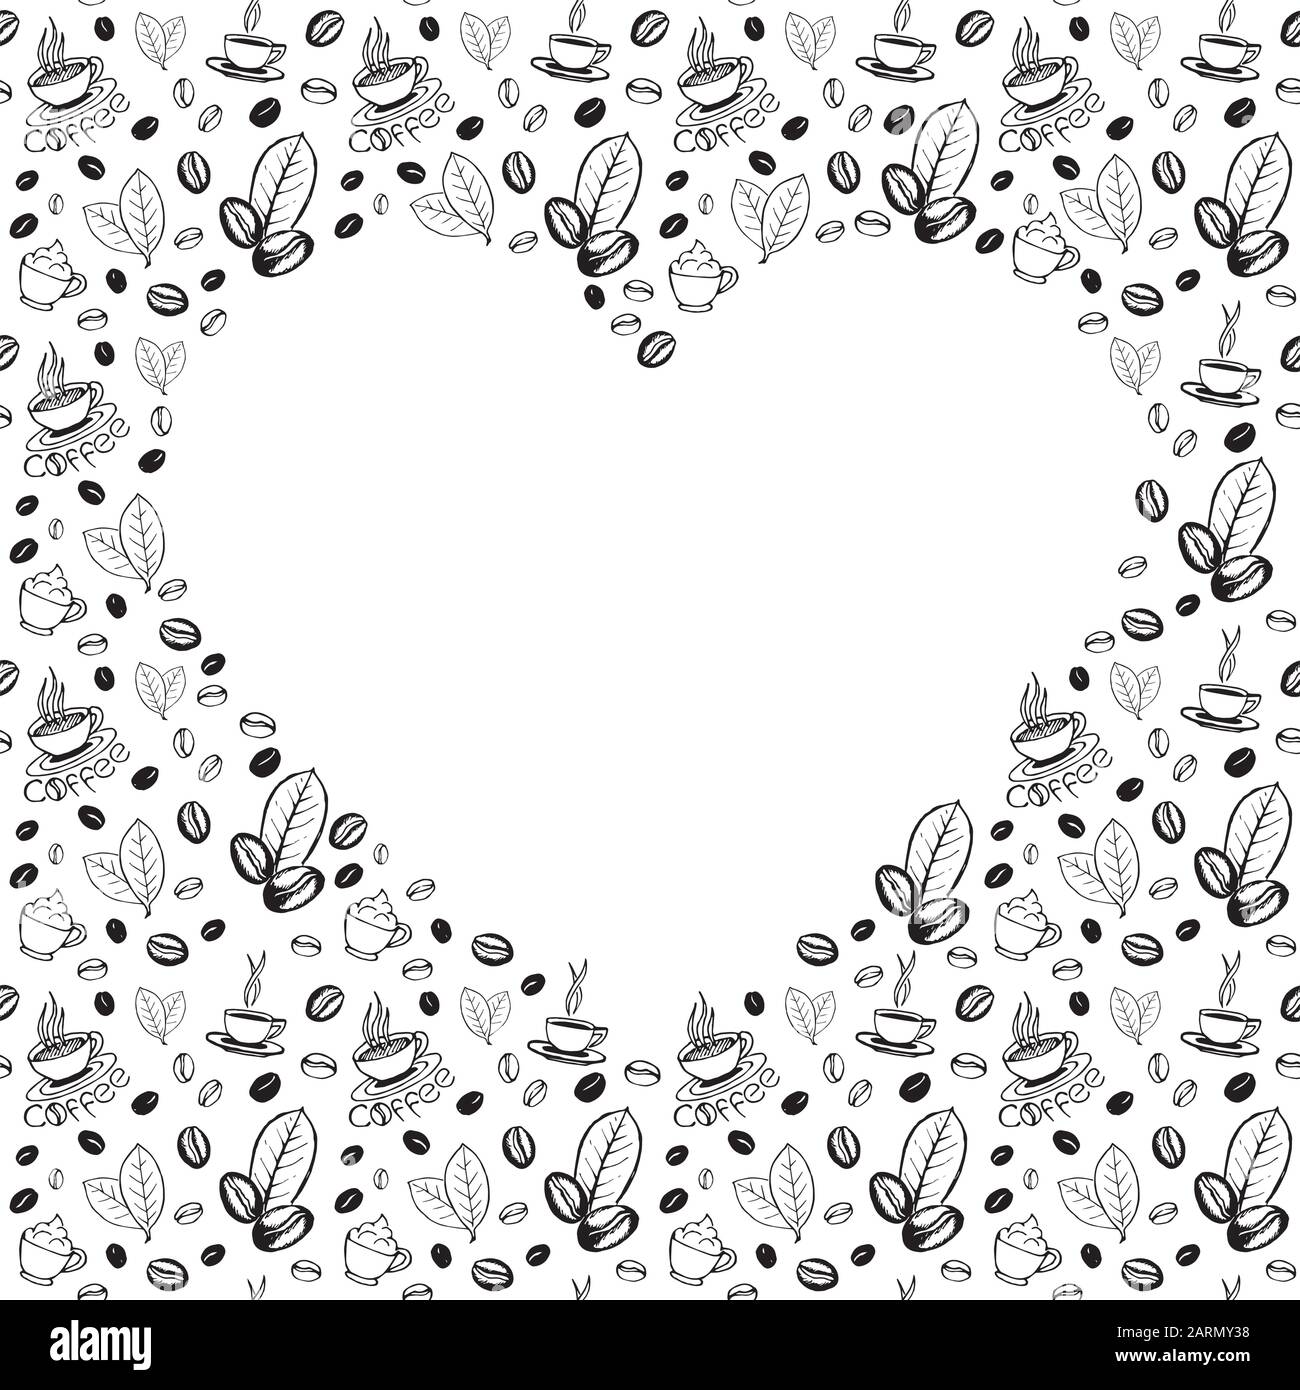 Coffee doodles background with blank heart shape inside. Hand drawn sketchy symbols pattern. Vector eps8 illustration. Stock Vector